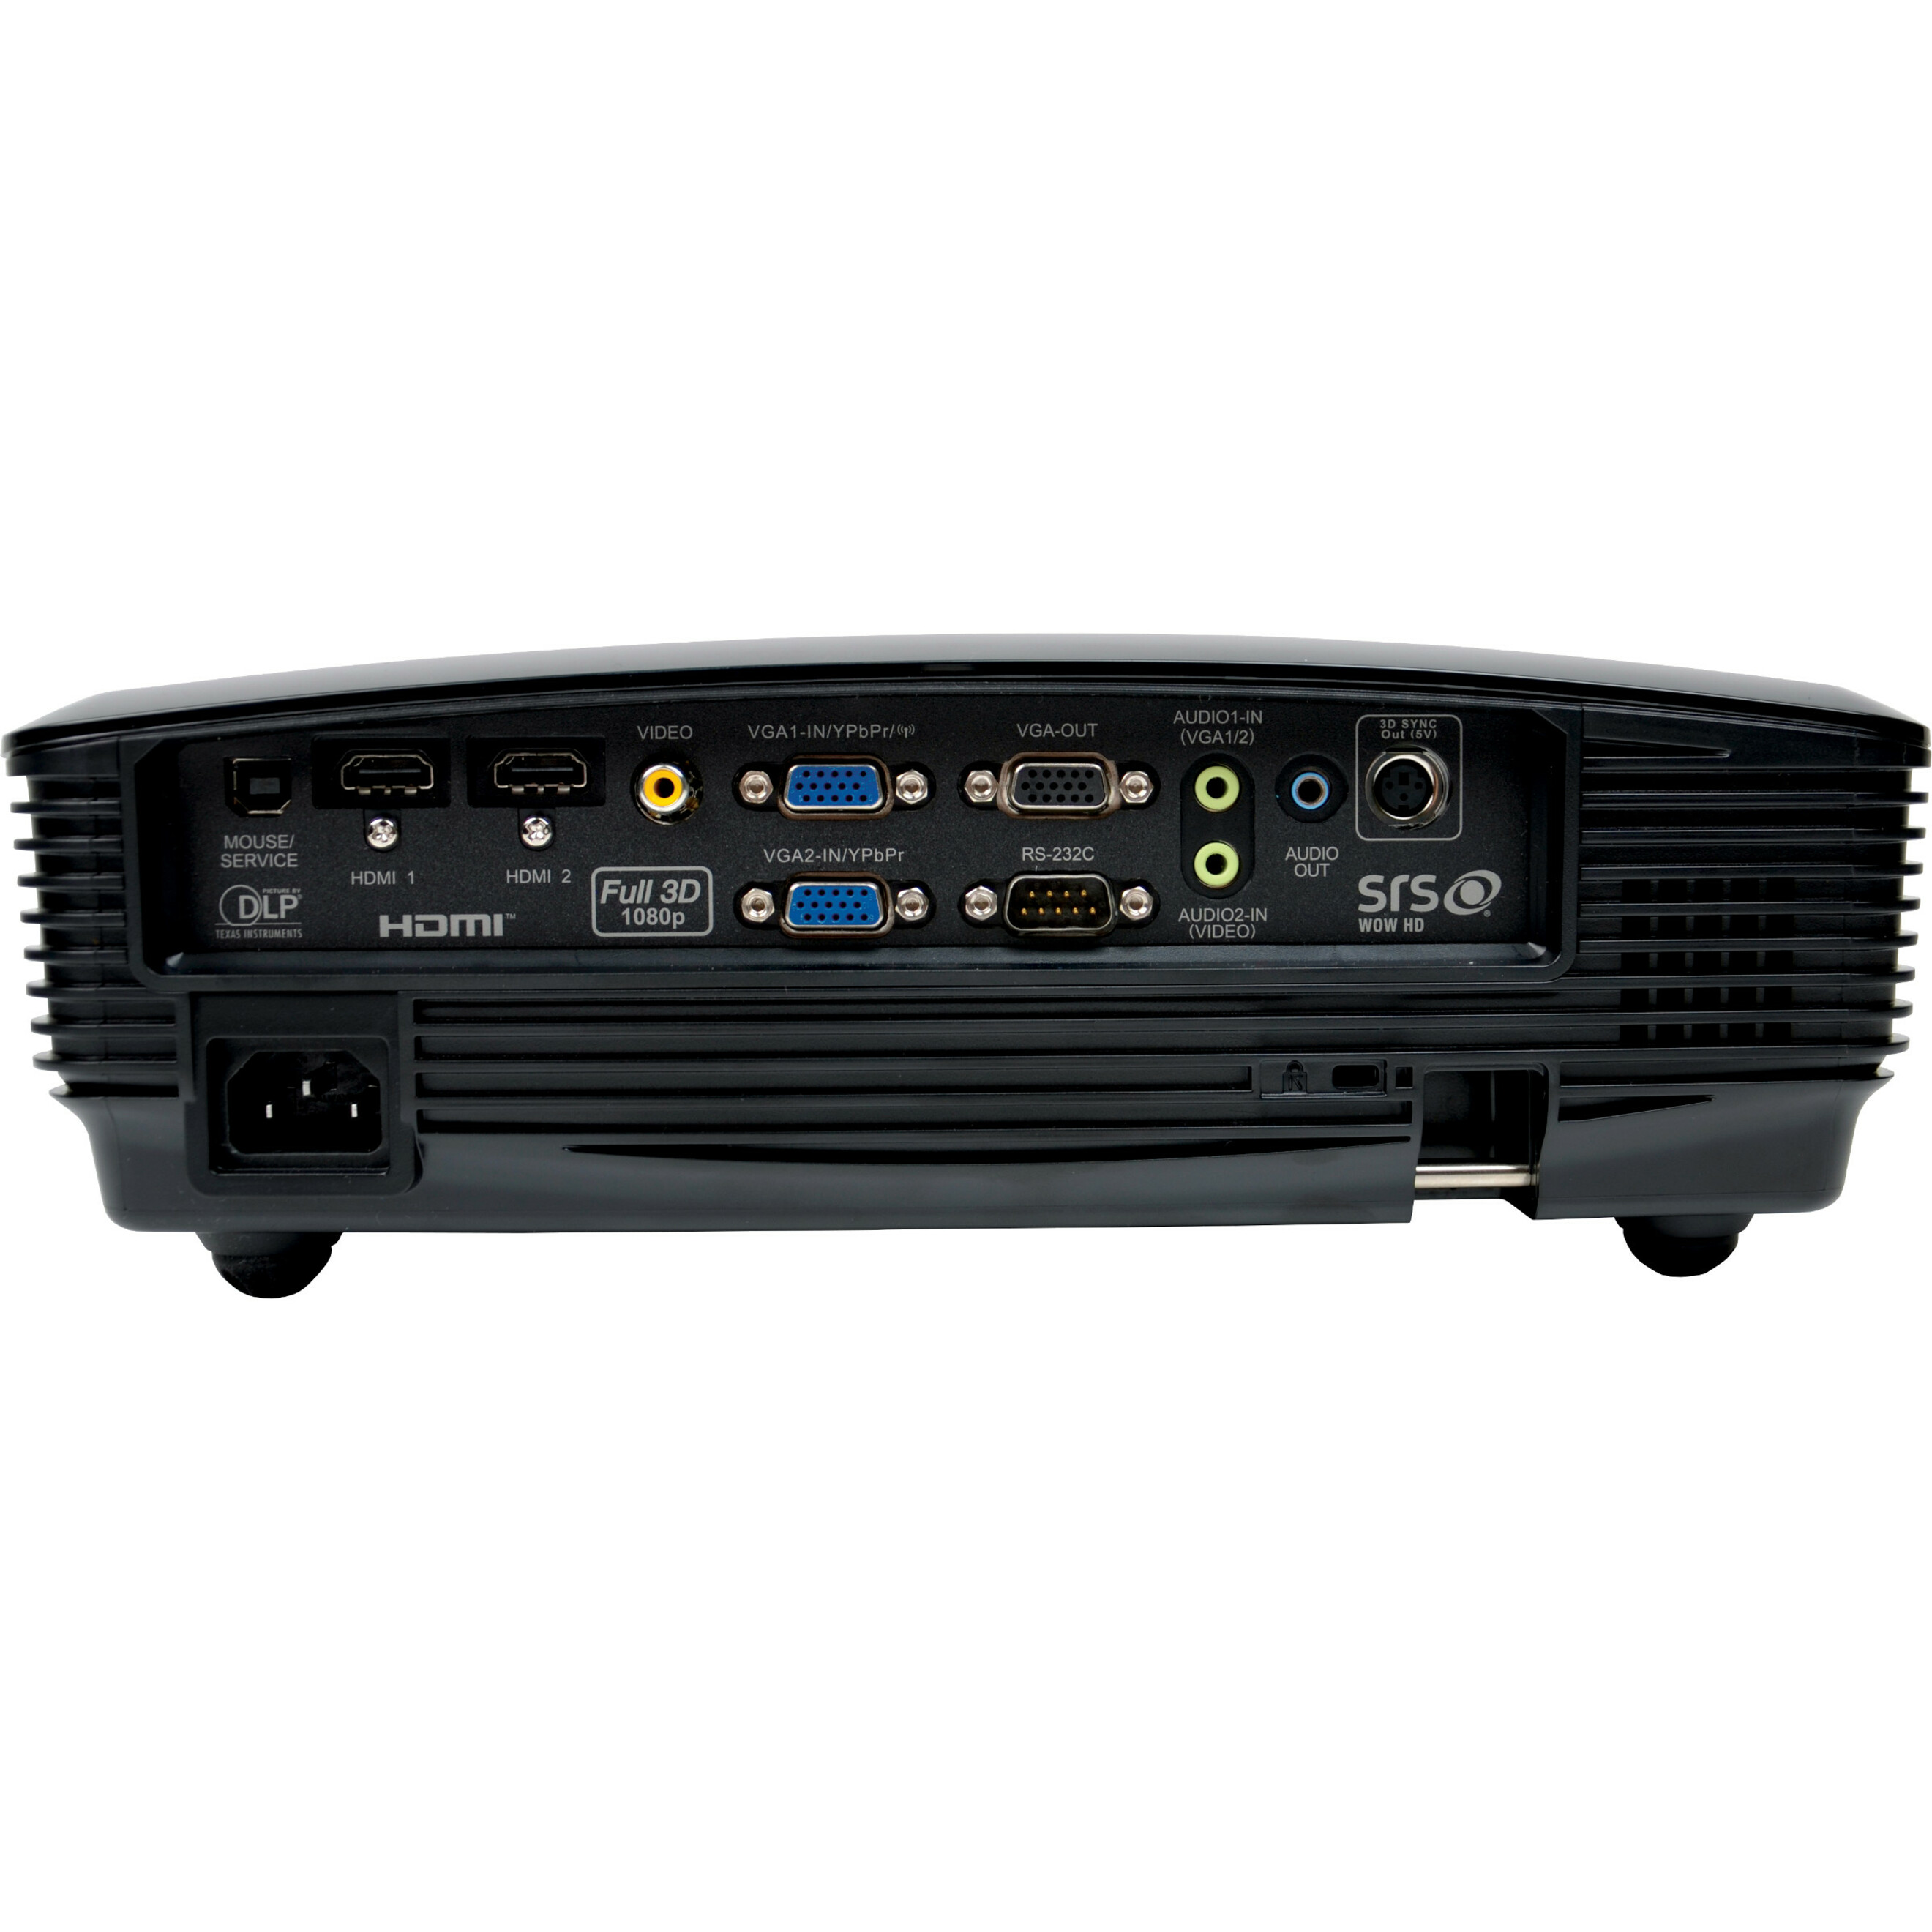 Optoma HD131Xe 3D DLP Projector, 16:9 - image 5 of 6